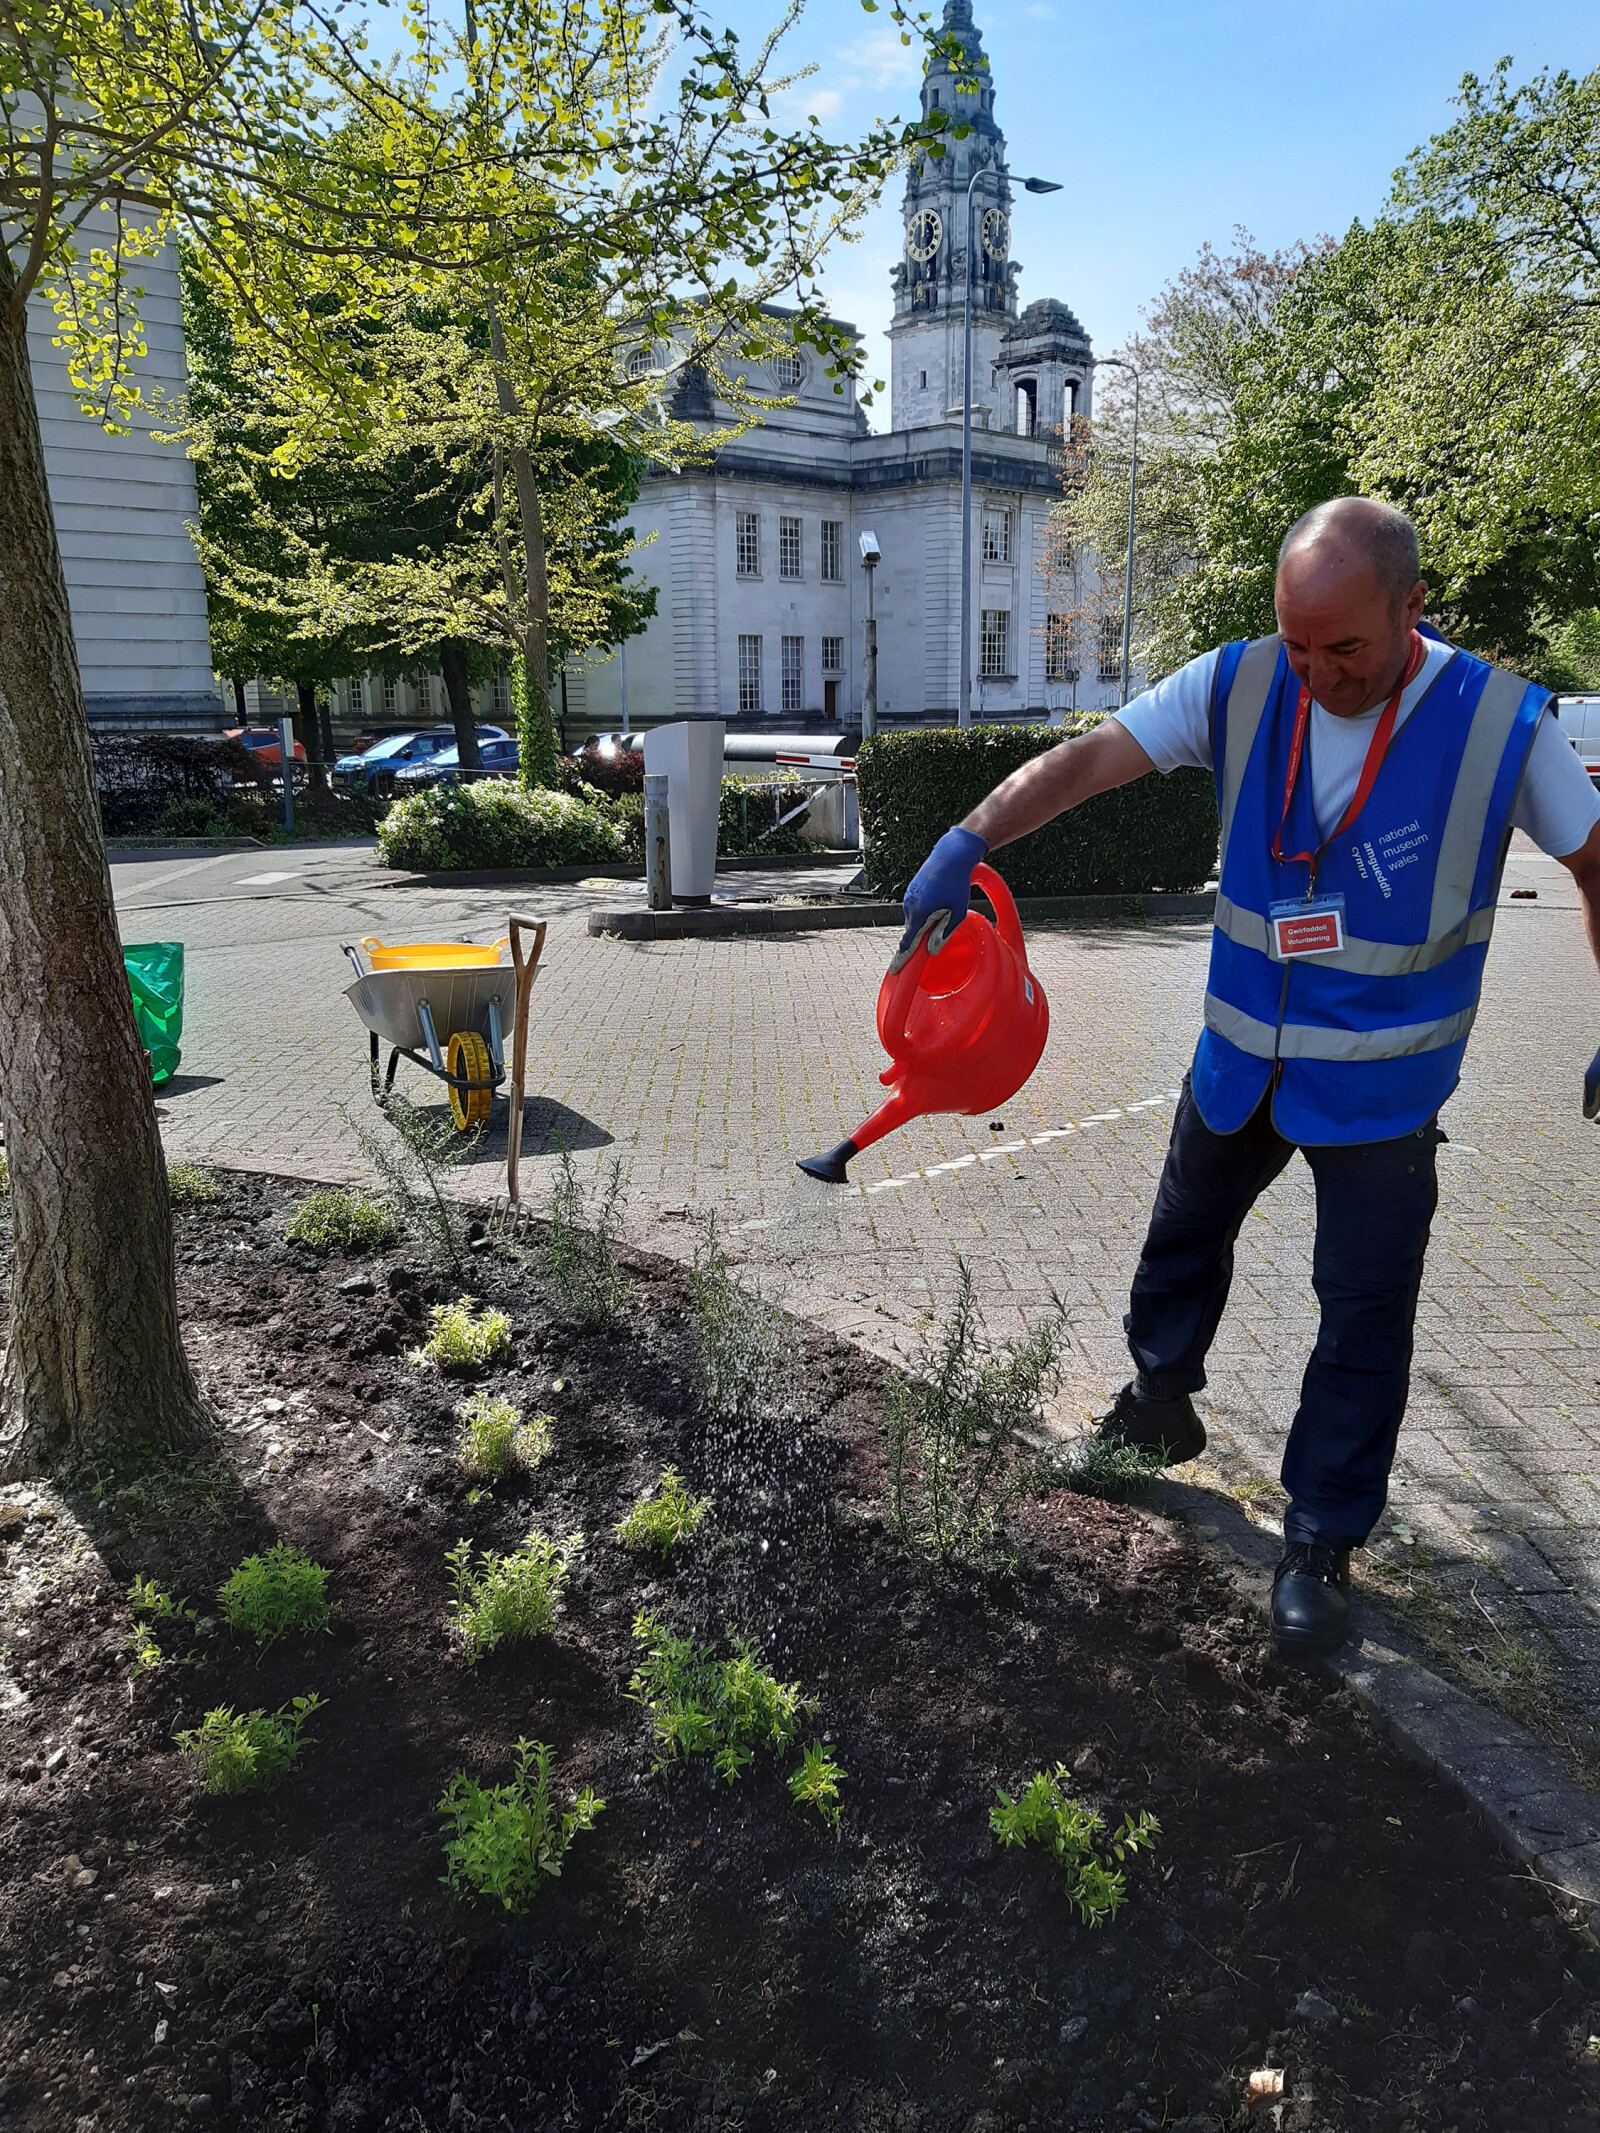 Volunteer watering the newly planted bed with City Hall in the background